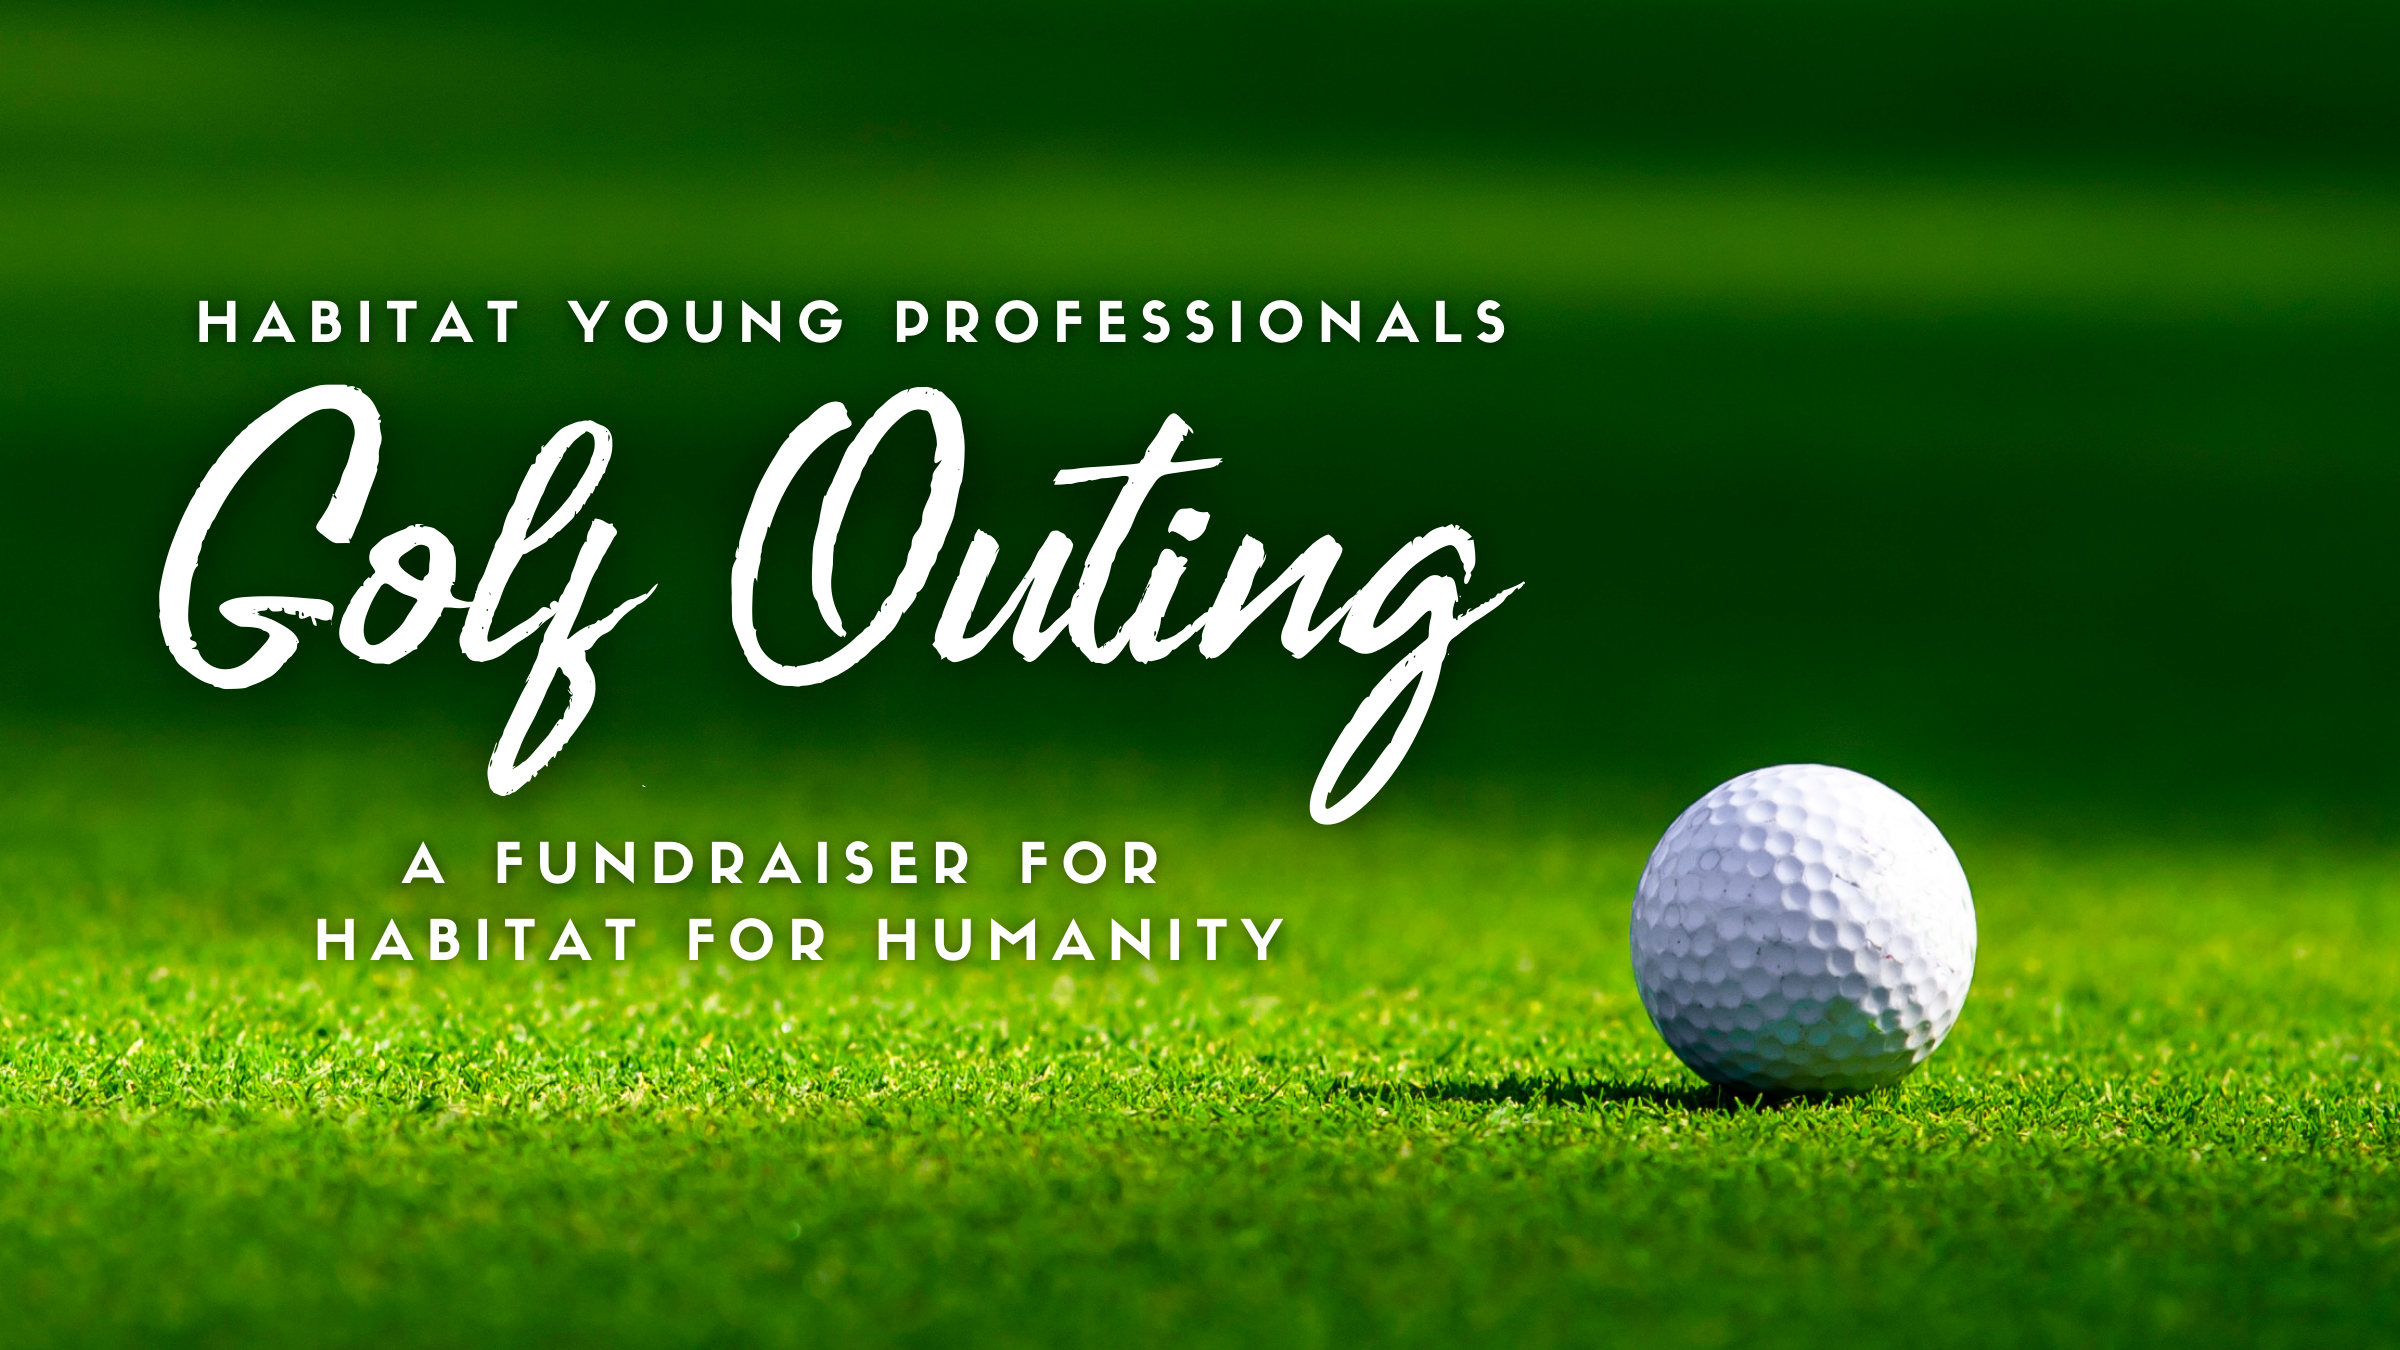 HYP Golf Outing